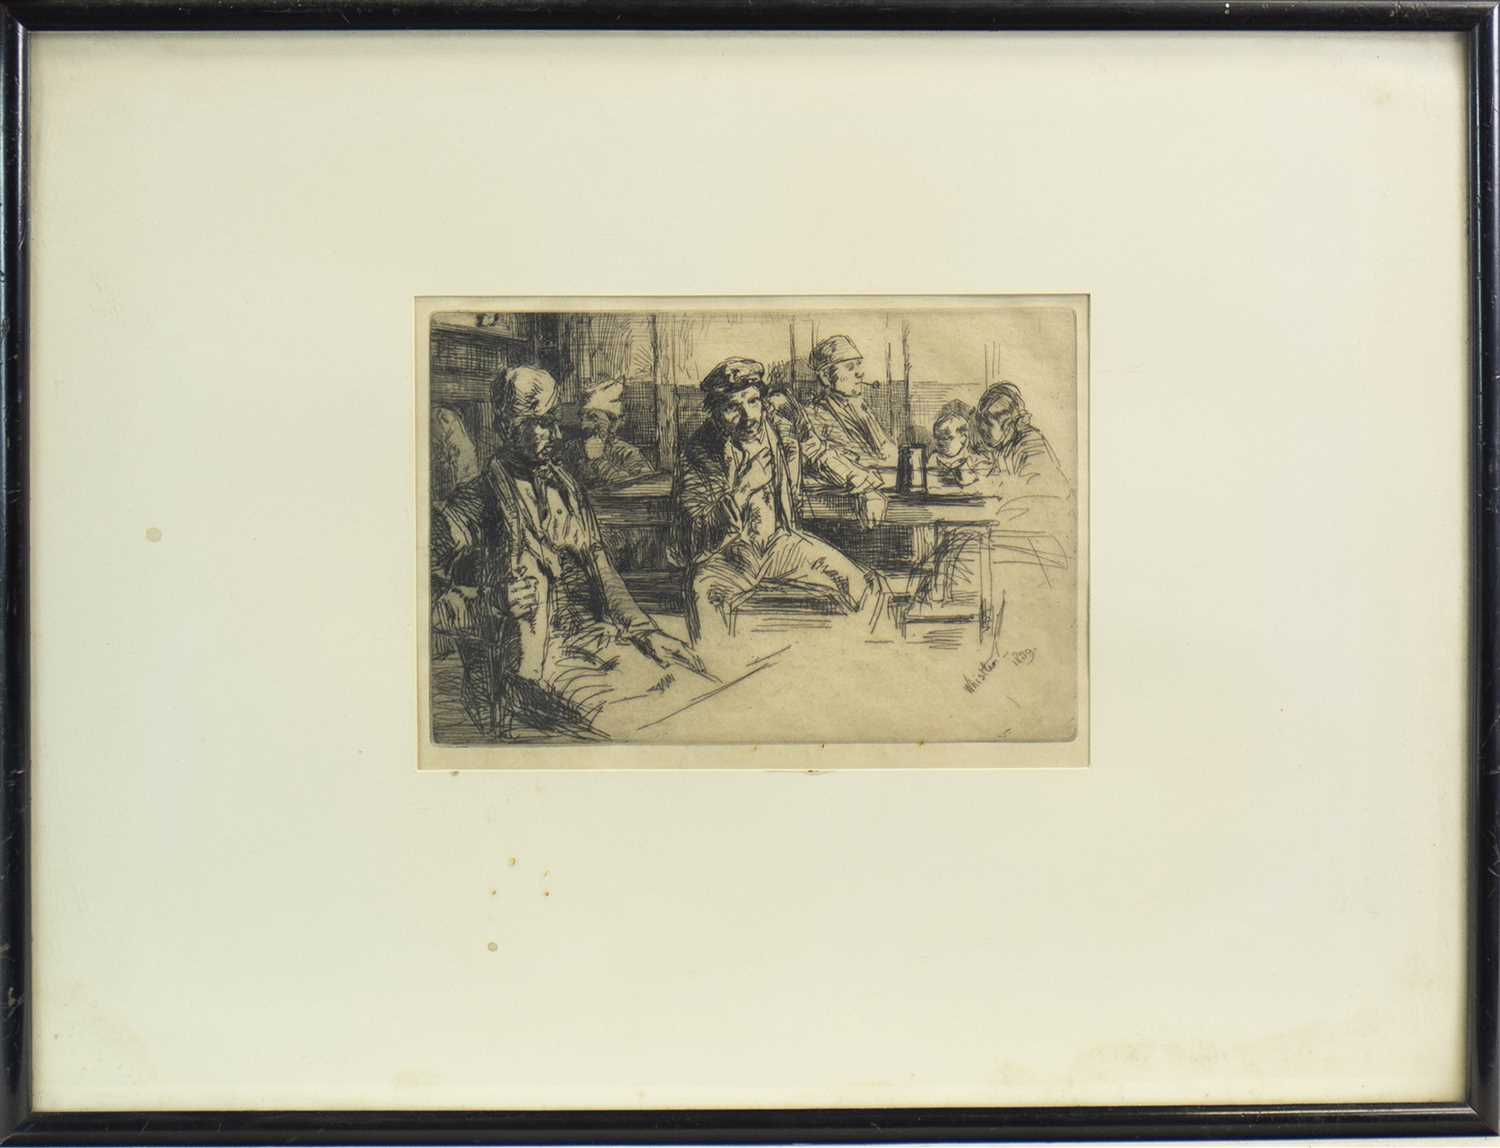 Lot 503 - LONGSHORE MEN, AN ETCHING BY WHISTLER